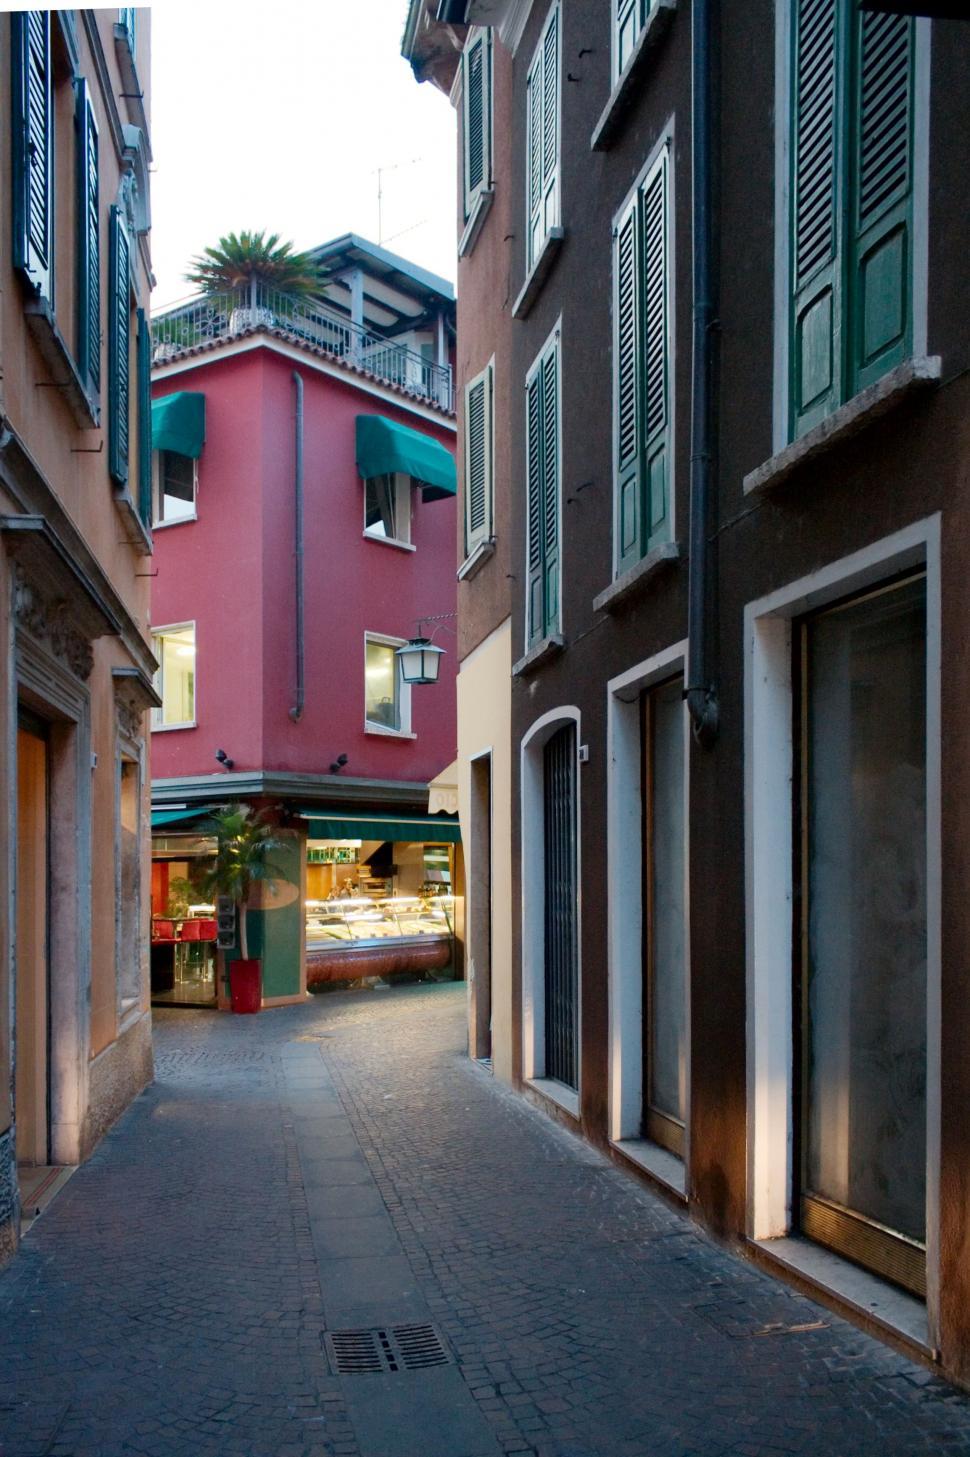 Free Image of Street in Italy 